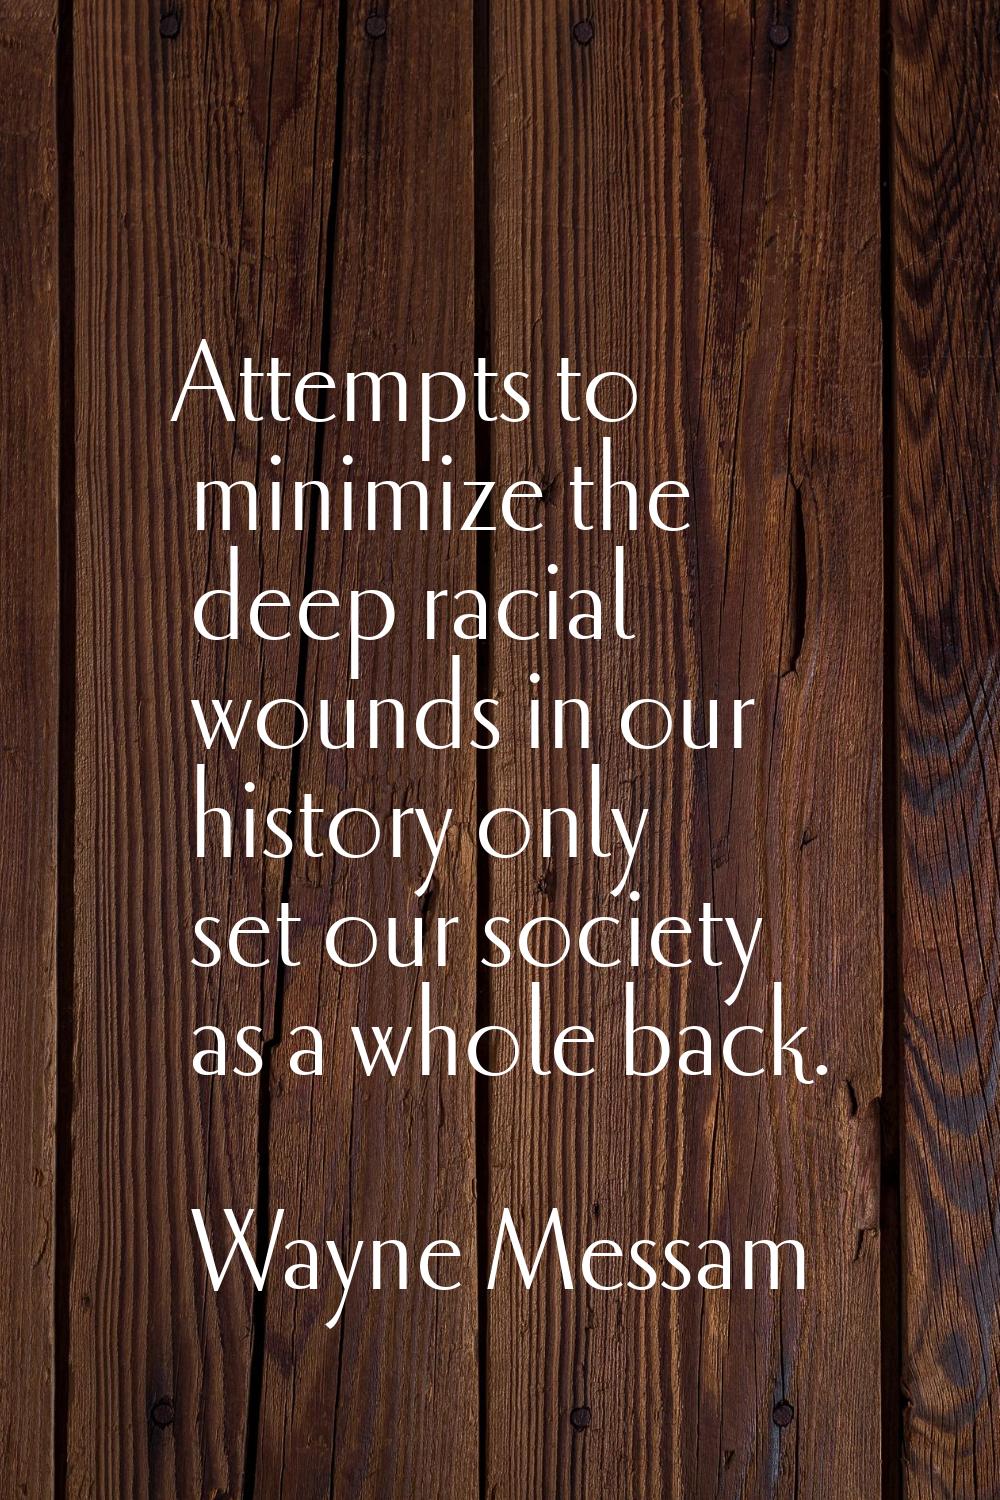 Attempts to minimize the deep racial wounds in our history only set our society as a whole back.